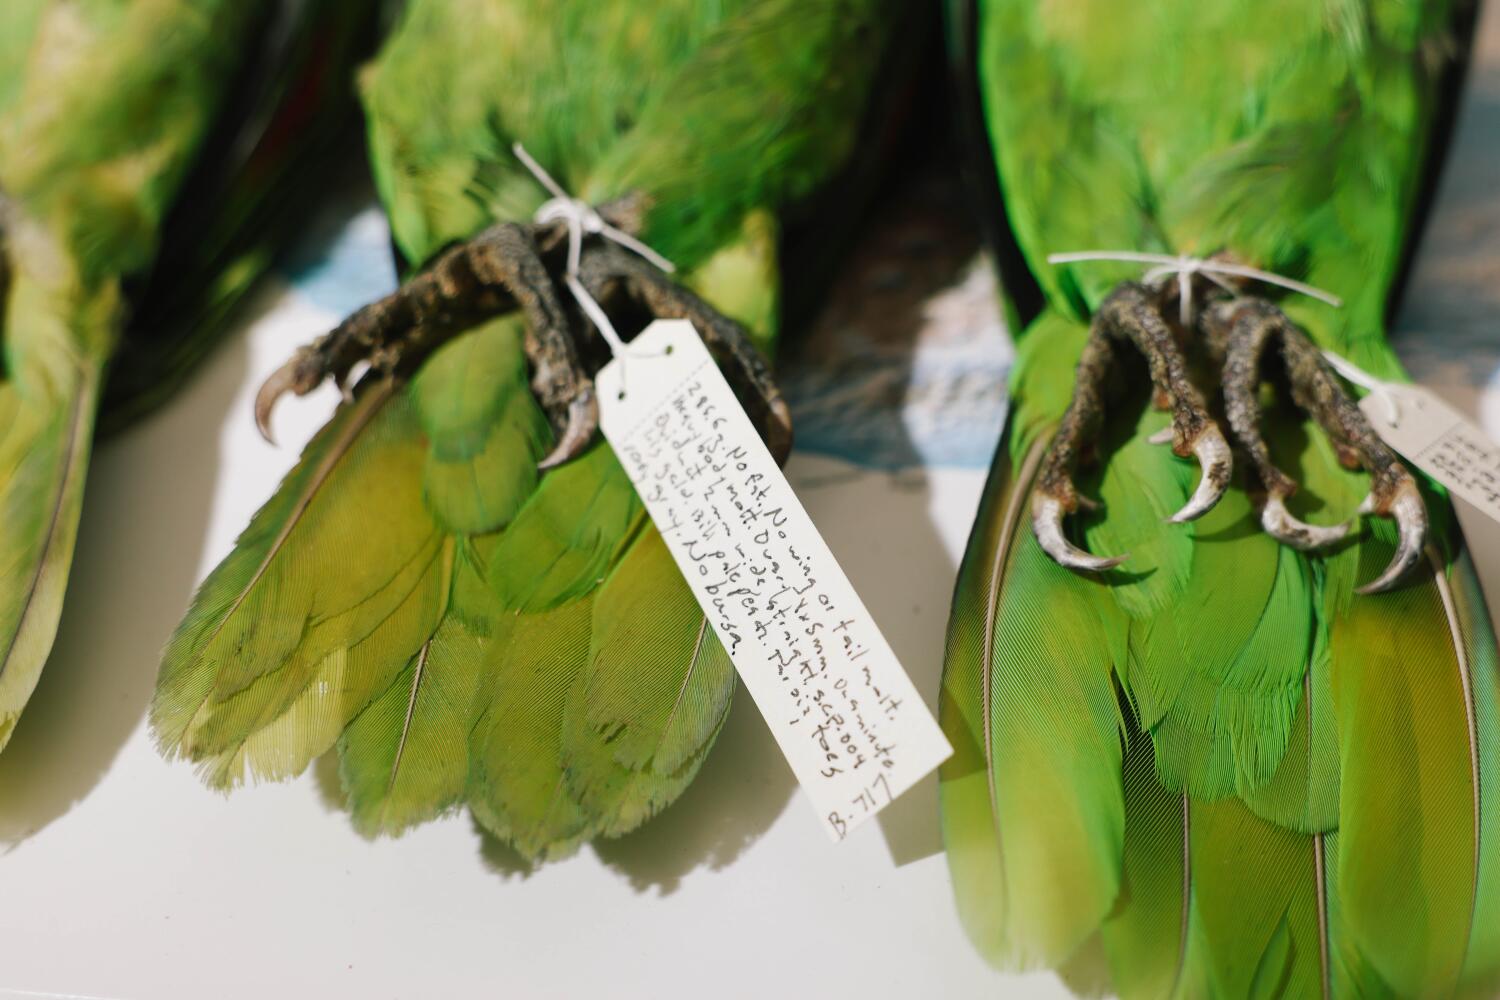 threatened in their homeland, feral mexican parrots thrive on l.a.'s exotic landscaping